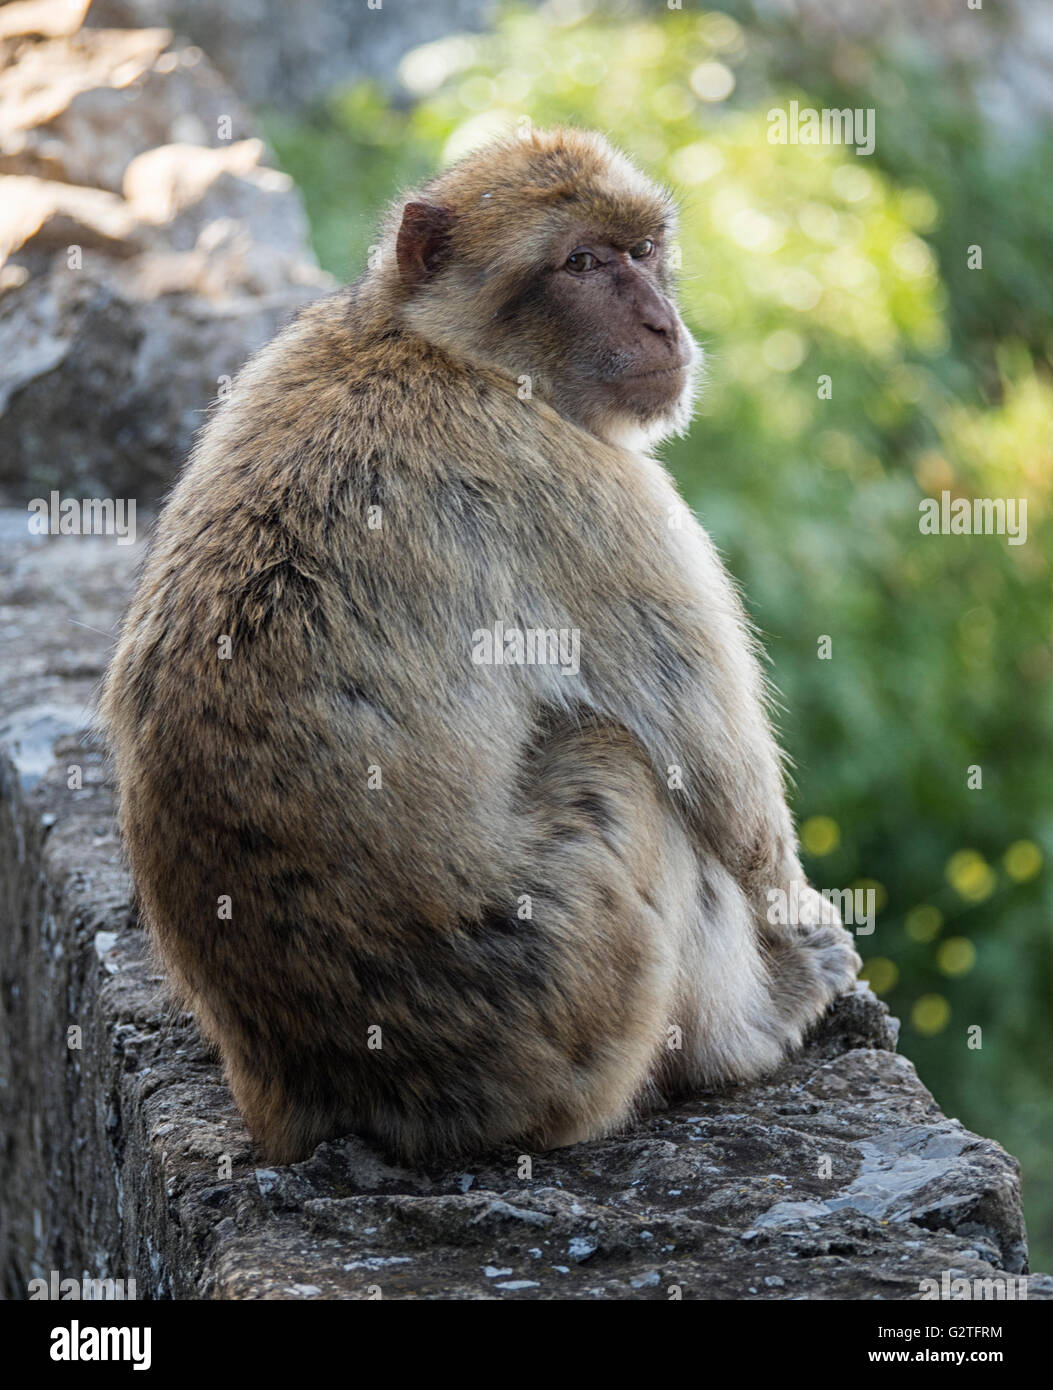 Barbary macaque of Gibraltar, the only wild monkey population in the European continent Stock Photo